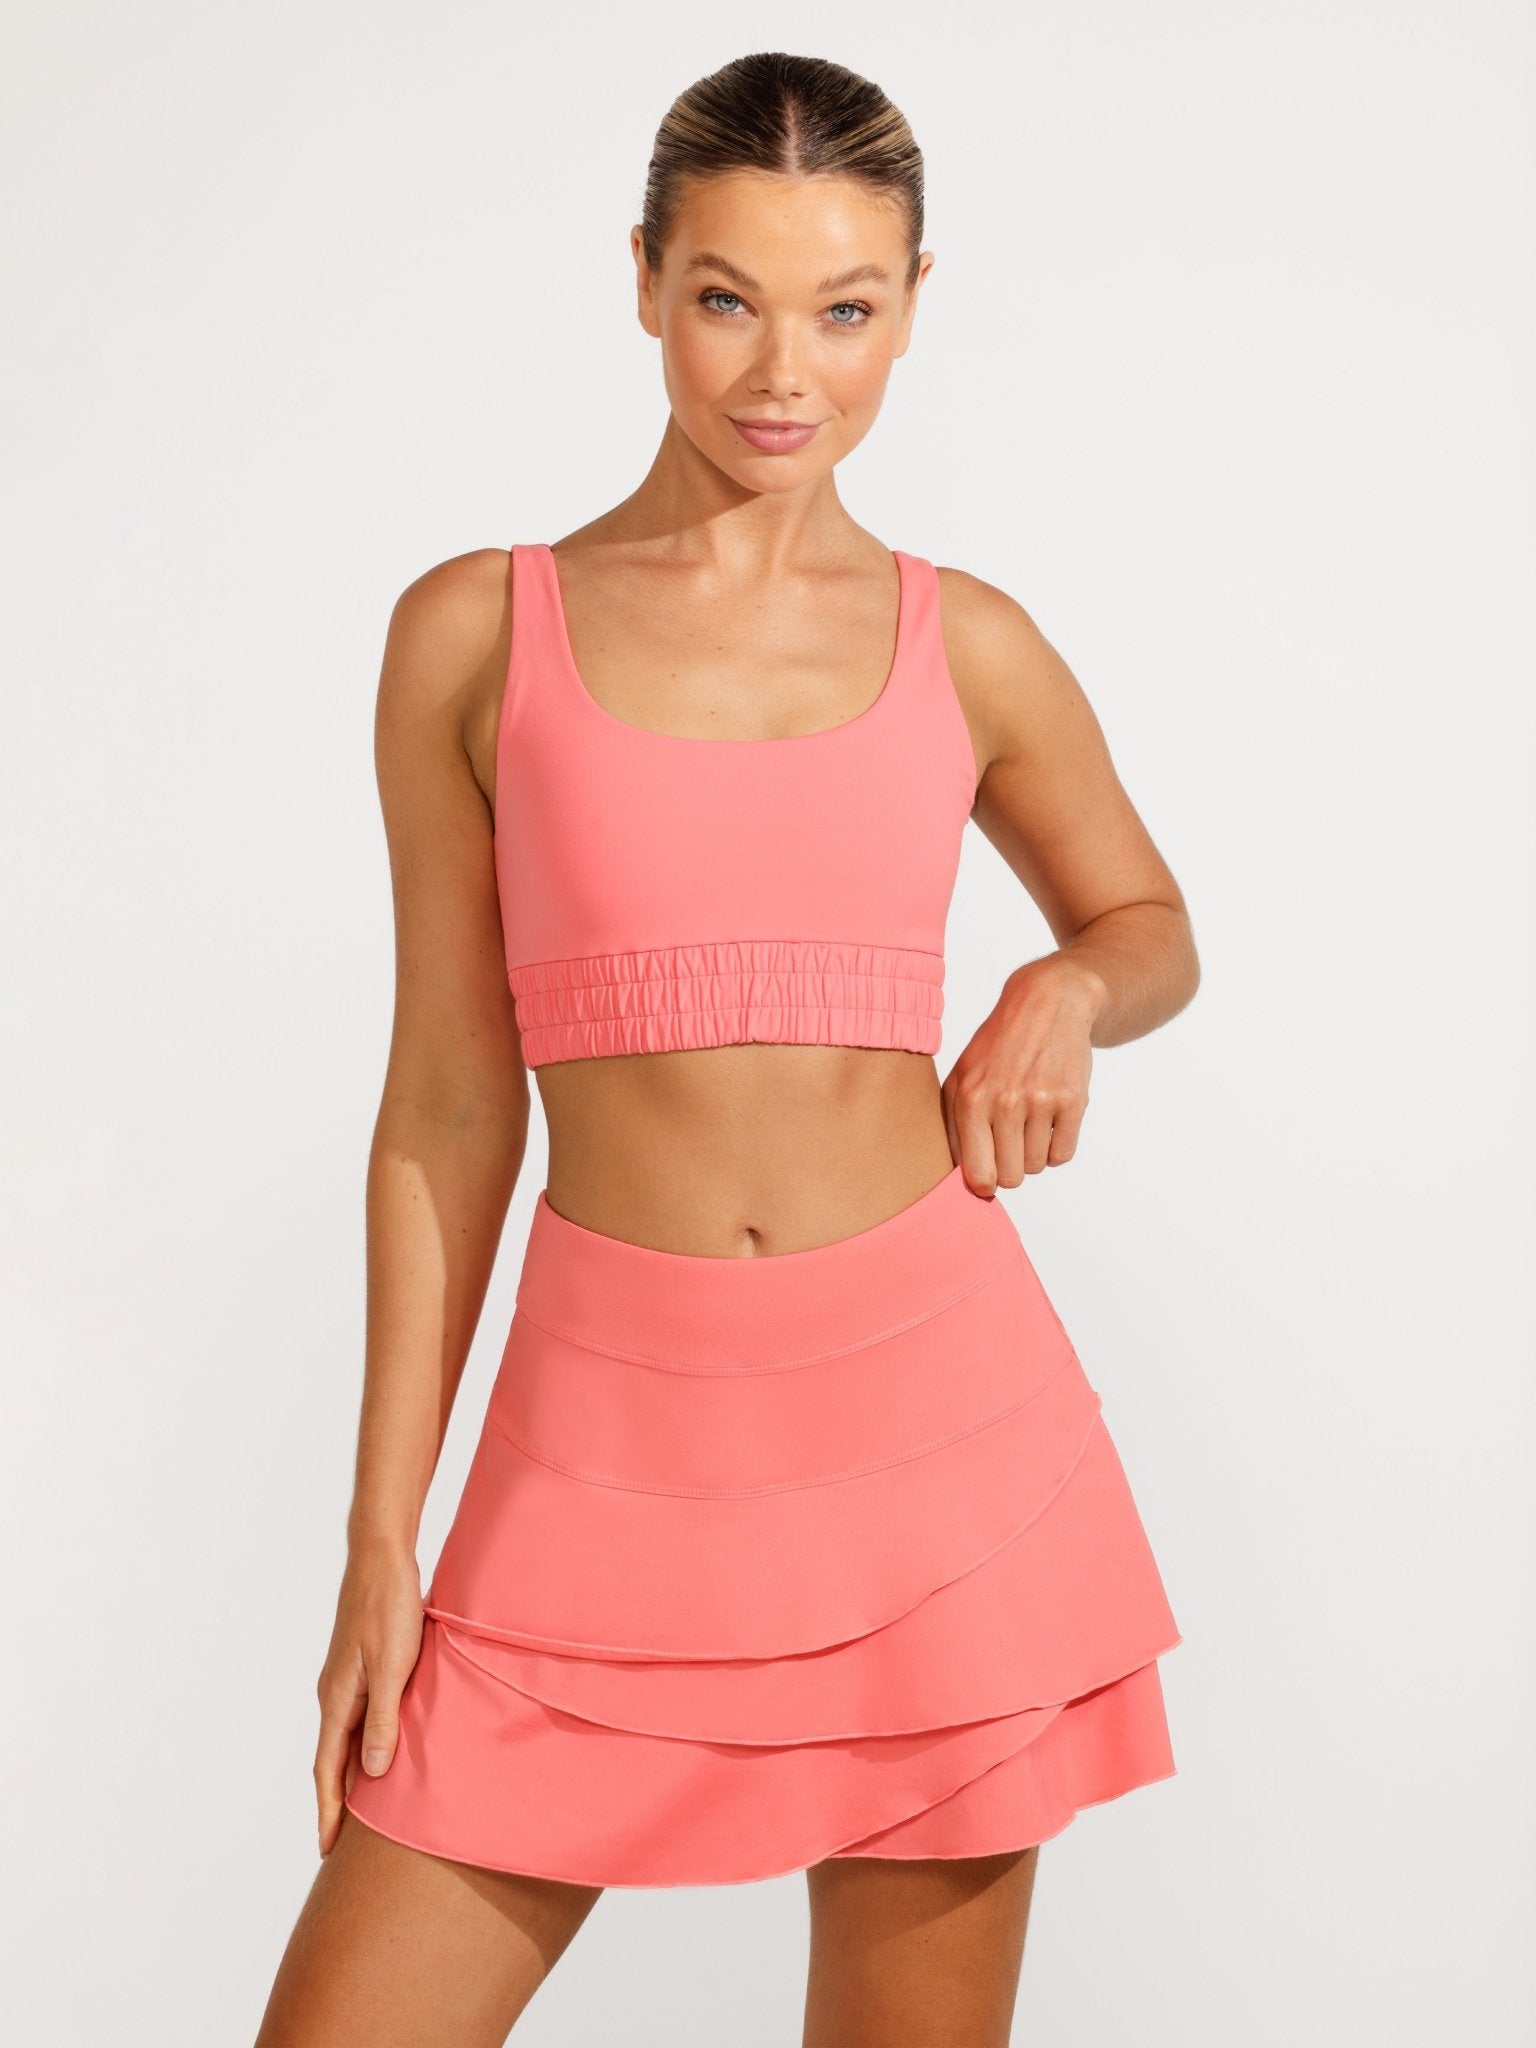 Cosmos Quick-Dry Tennis Skirt - EleVen by Venus Williams